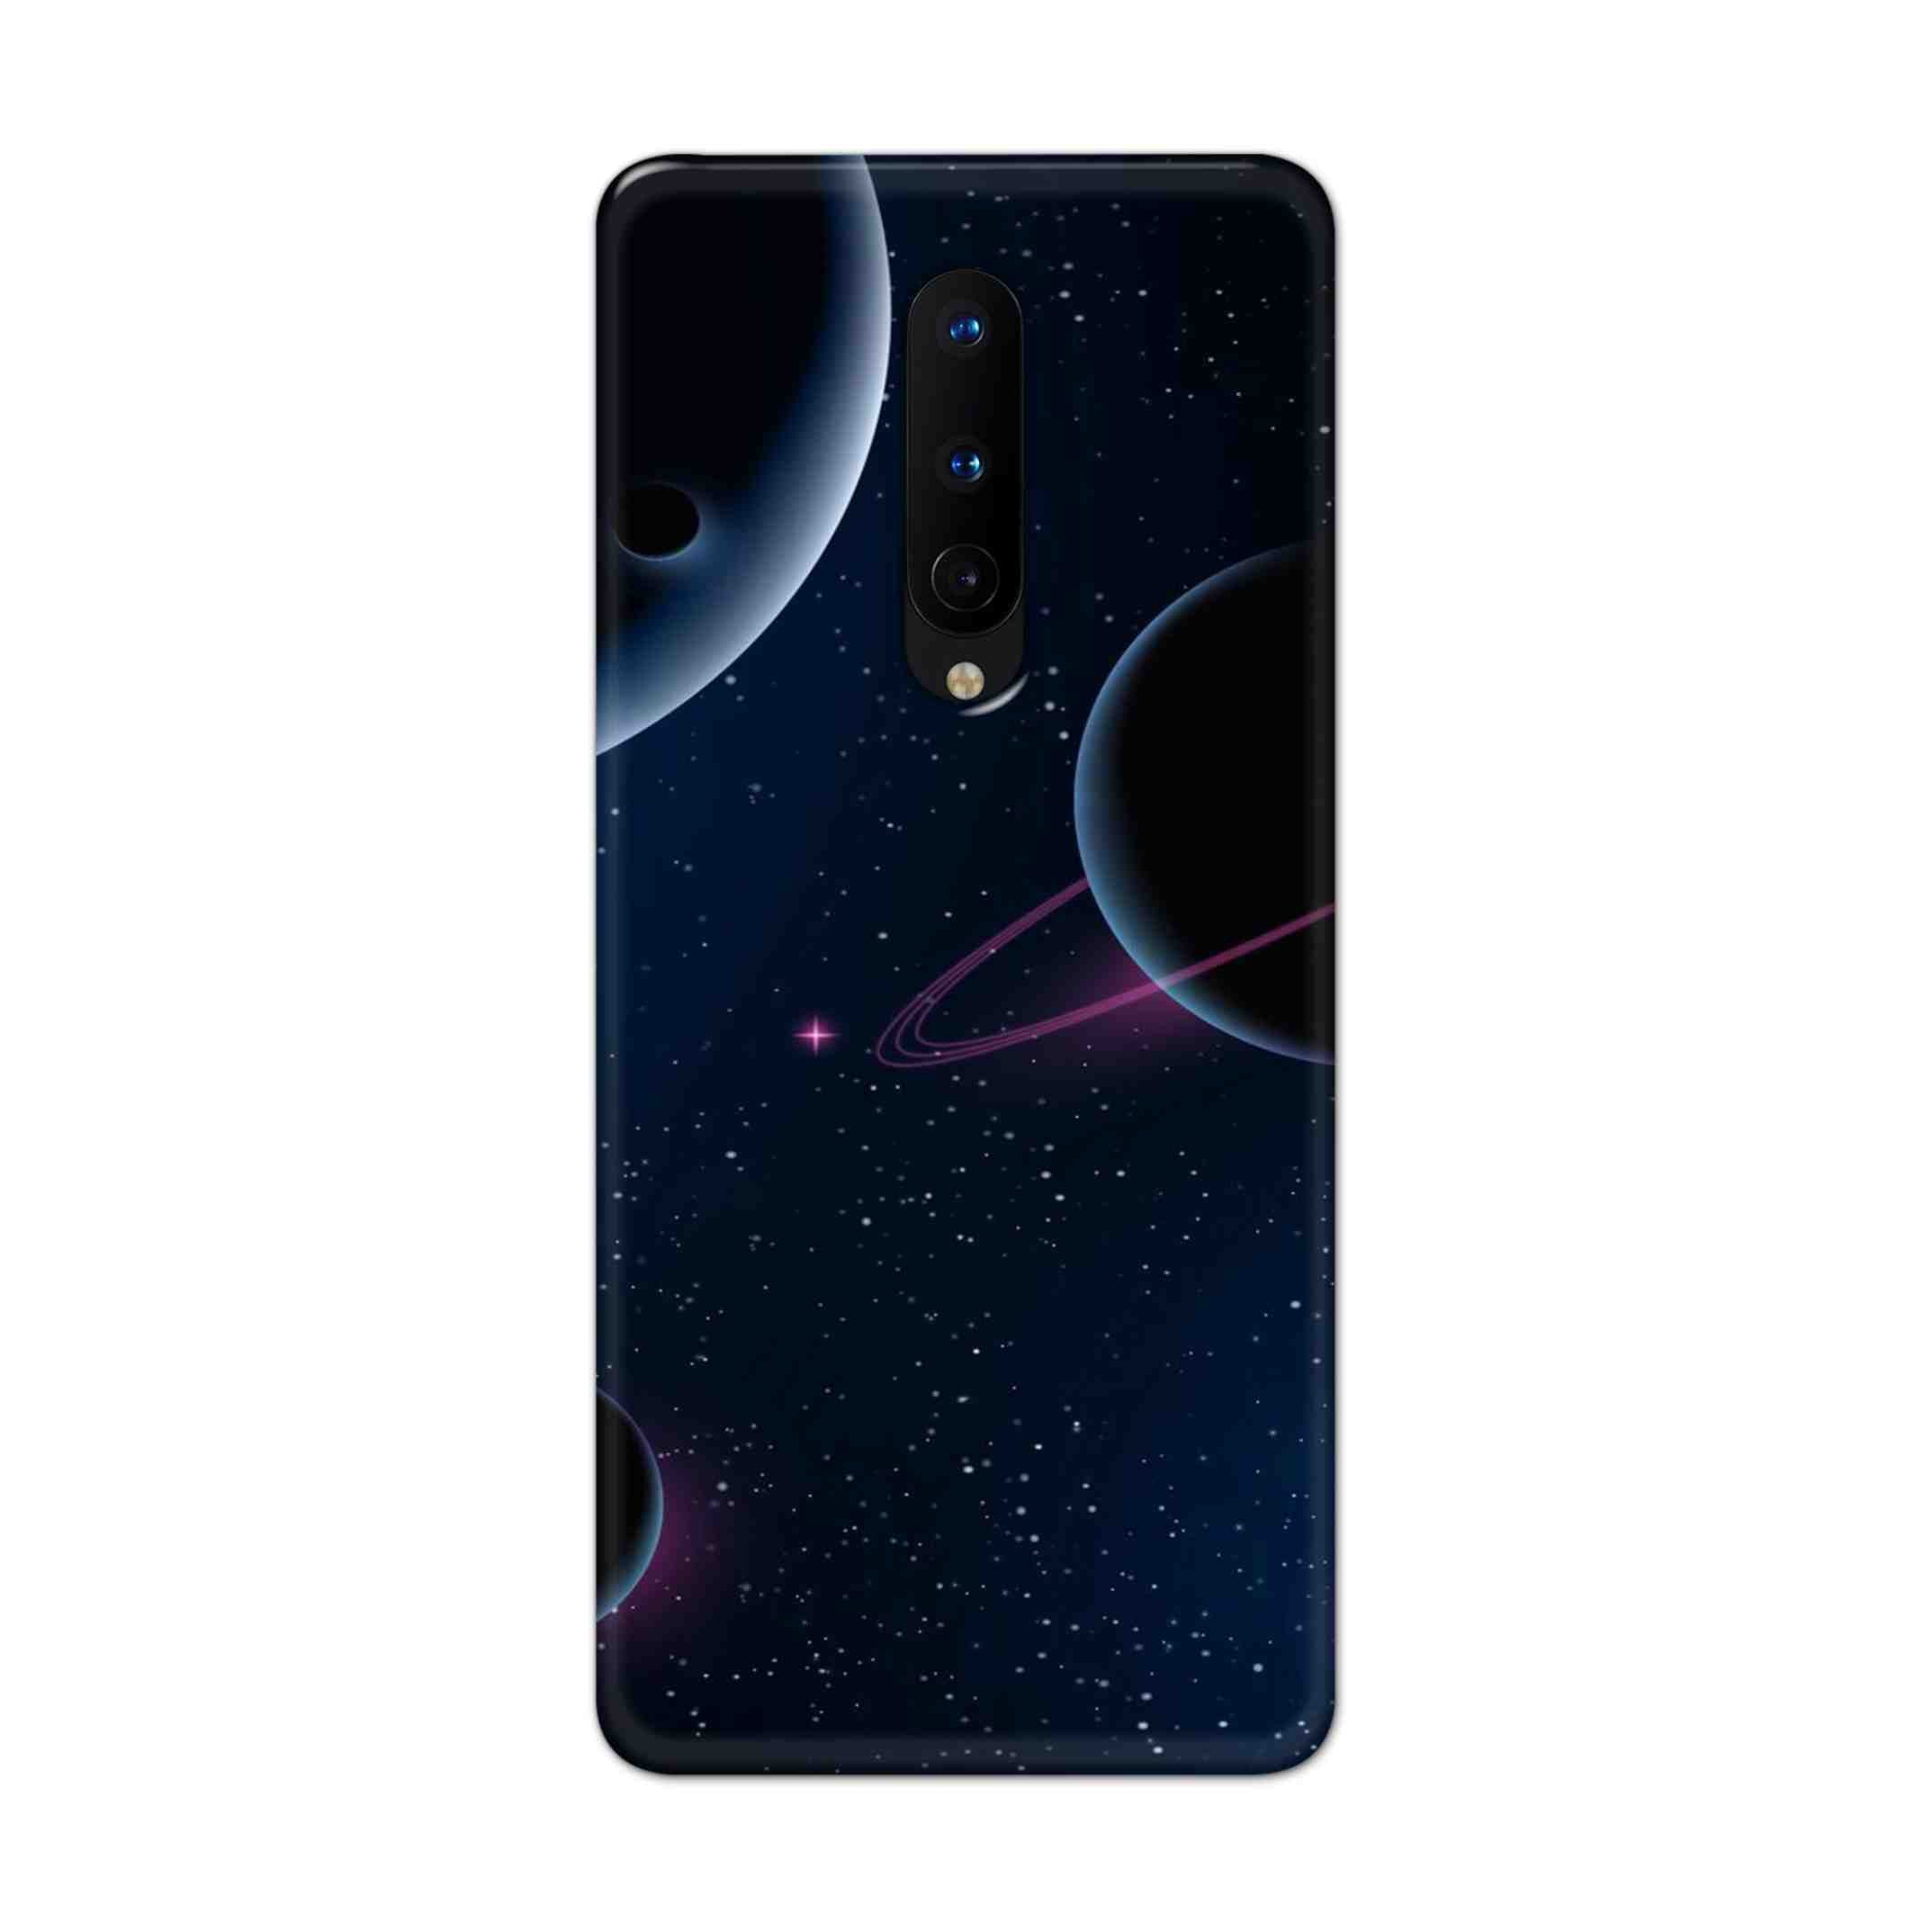 Buy Night Space Hard Back Mobile Phone Case Cover For OnePlus 8 Online